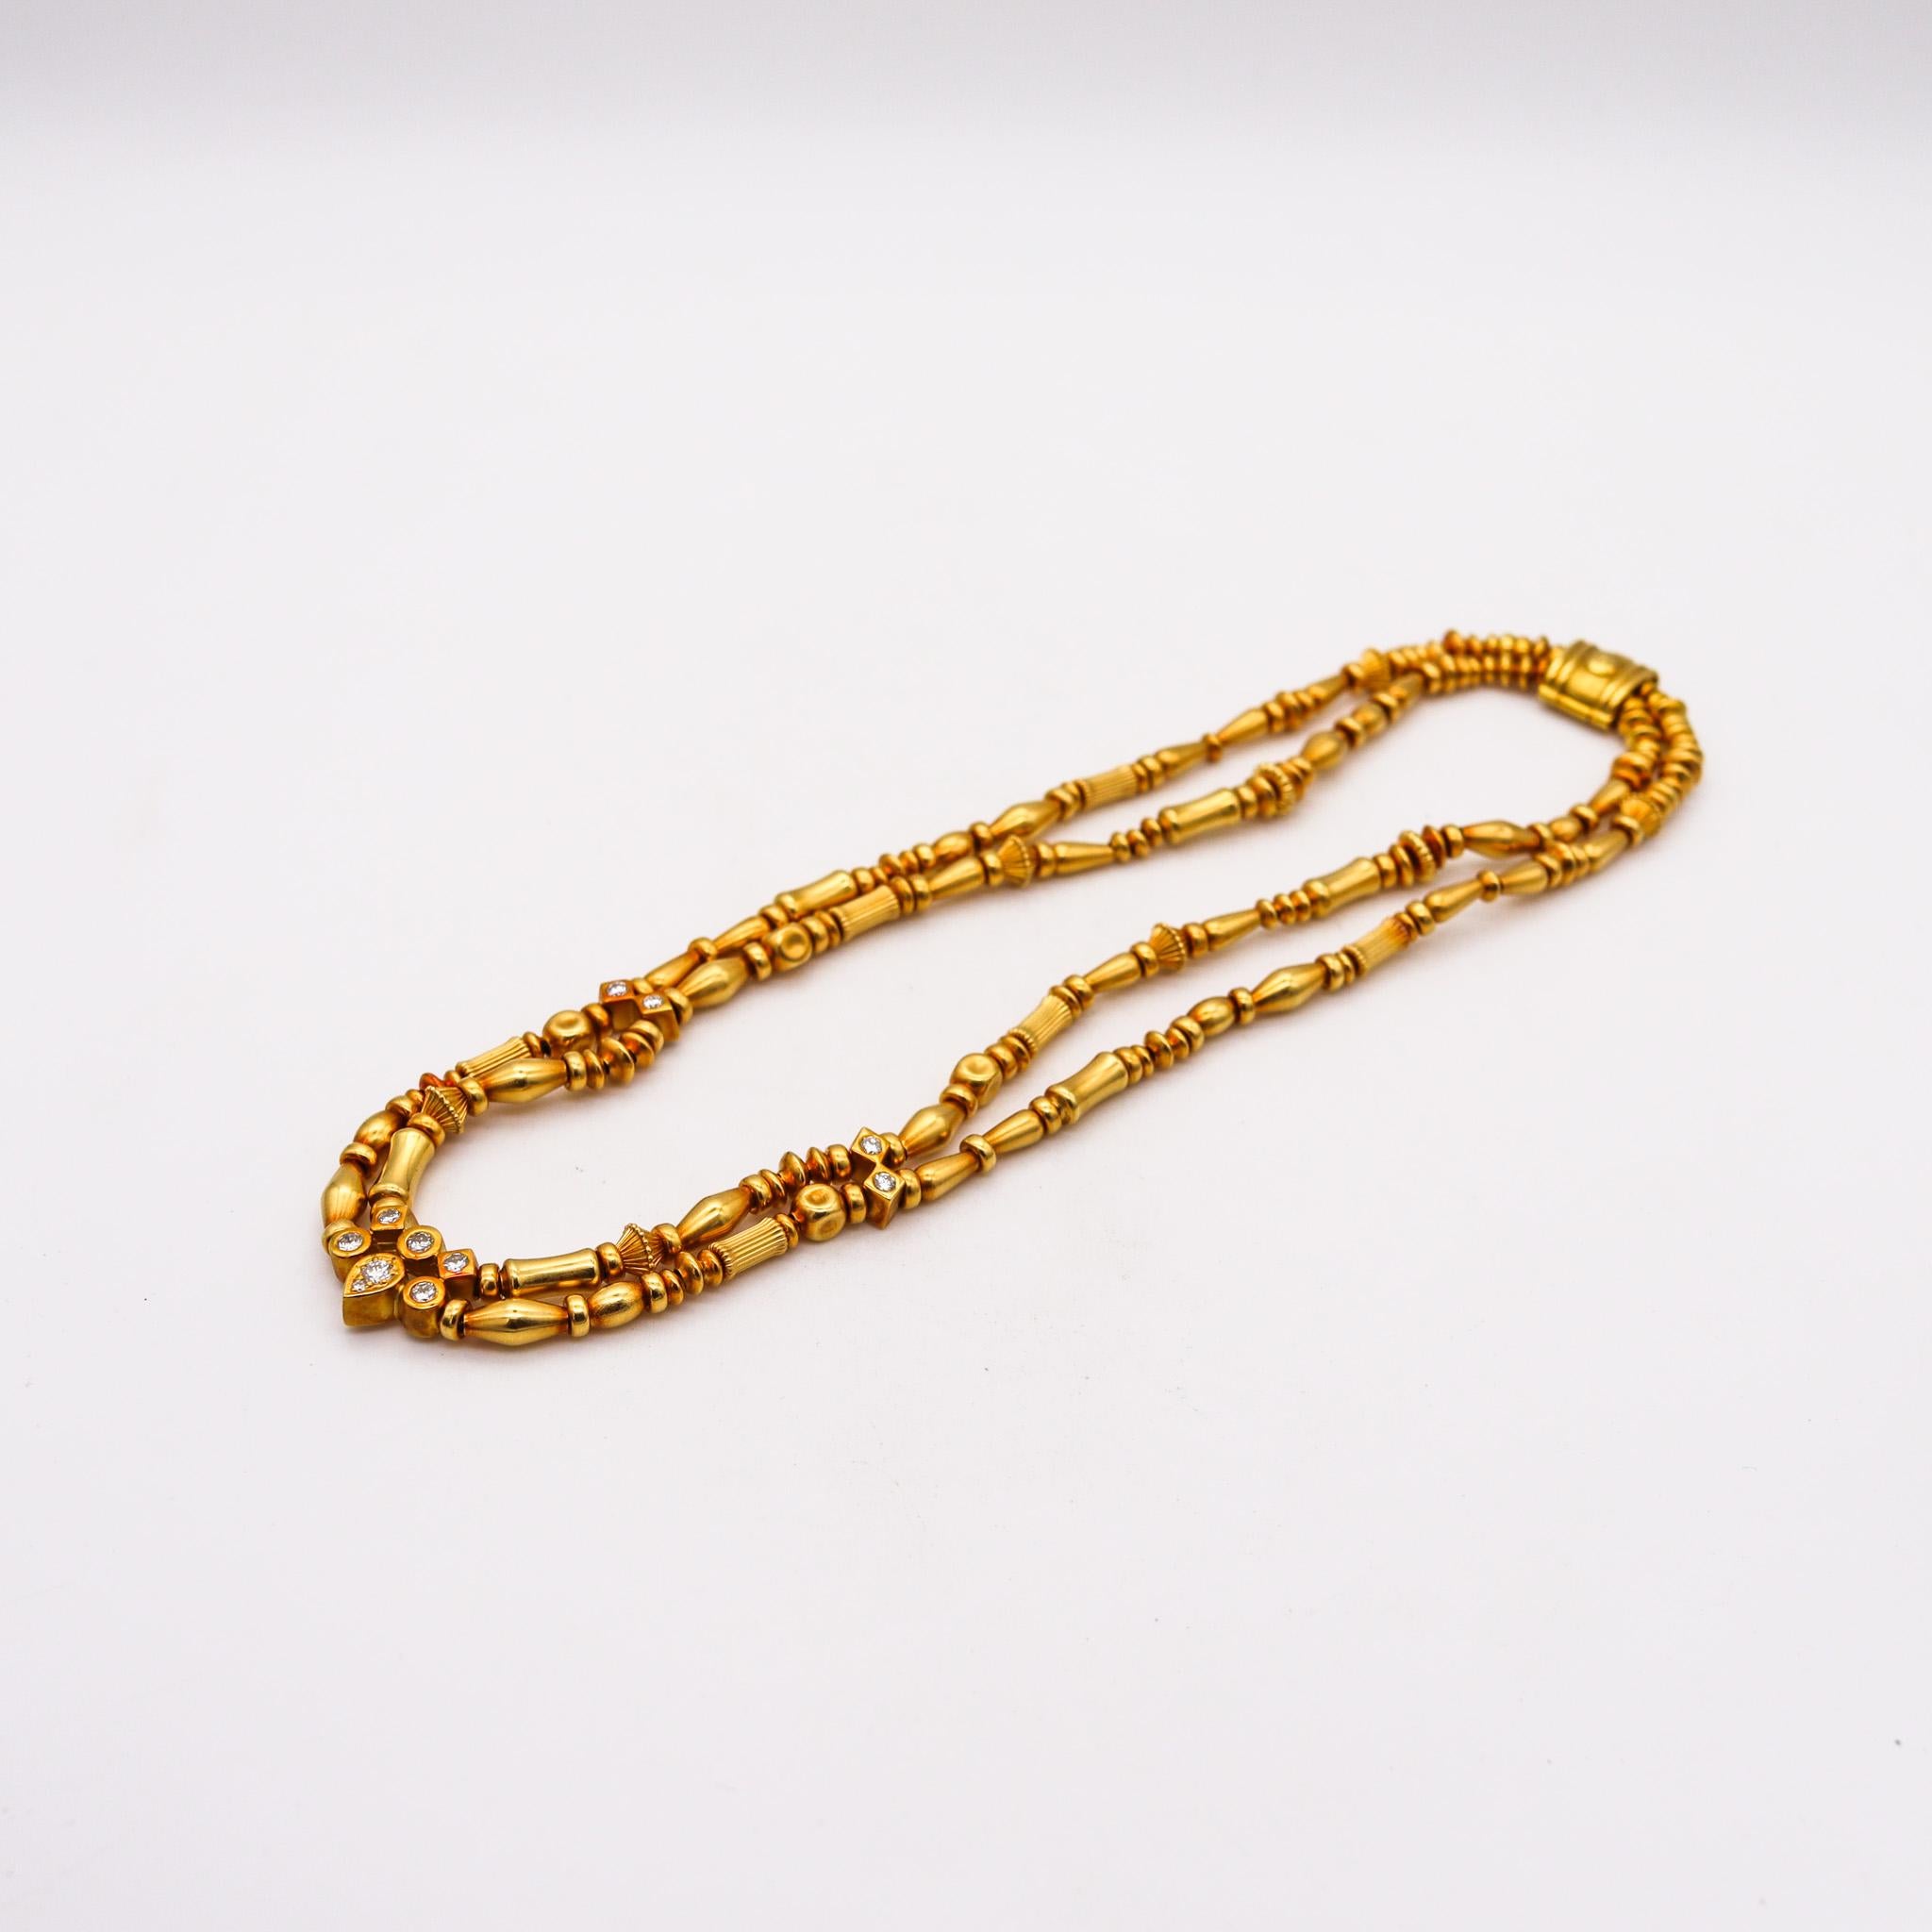 Etruscan Revival SeidenGang Etruscan Double Necklace In 18Kt Yellow Gold With VS Diamonds For Sale